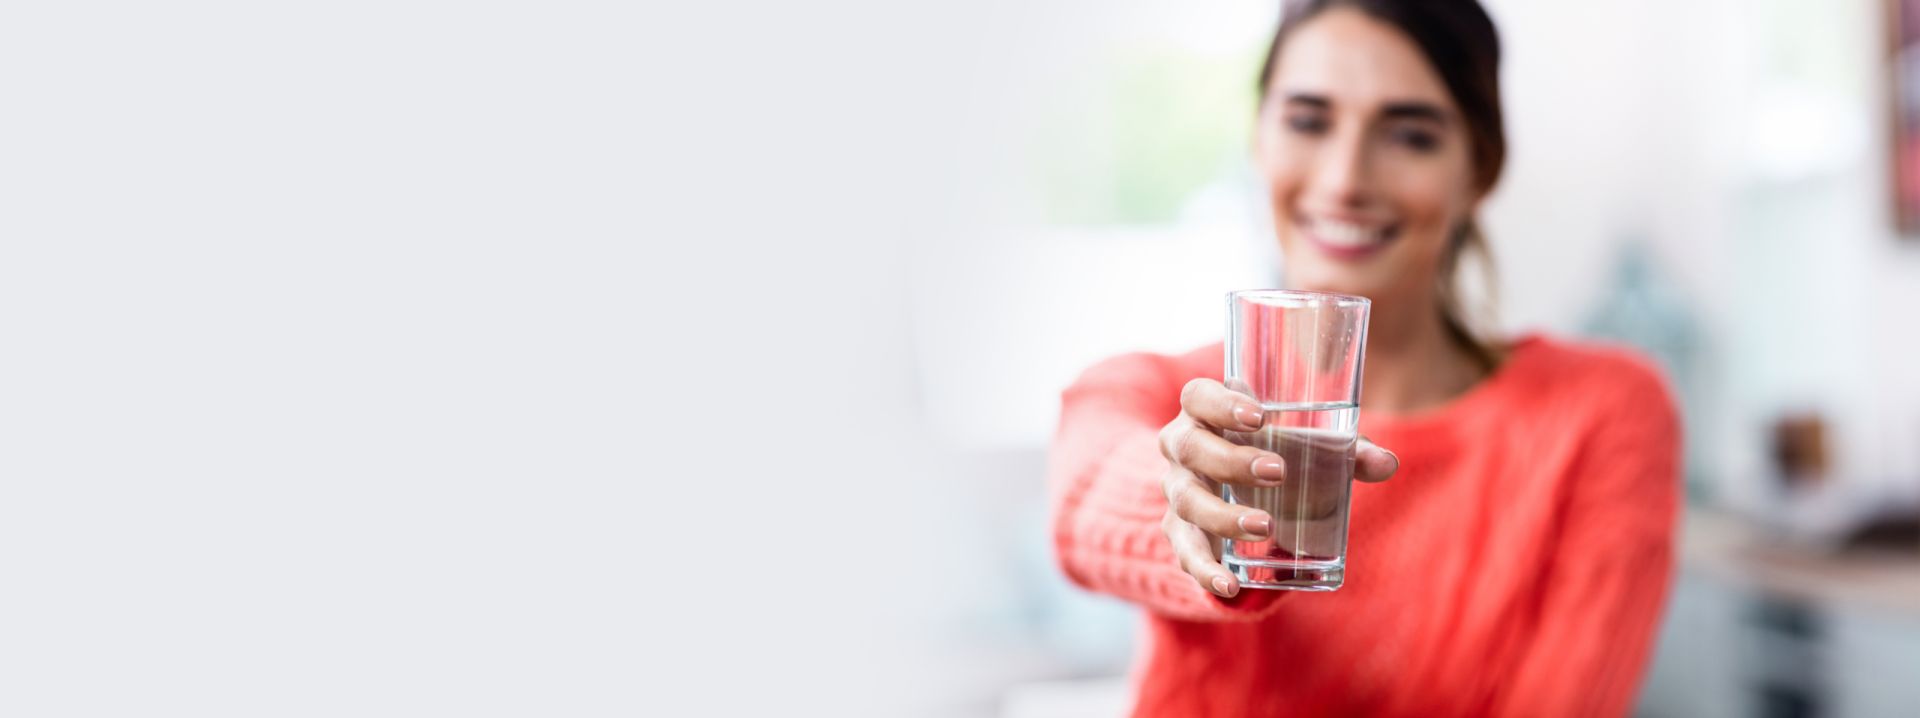 Woman holding glass of clean cold dispensed water